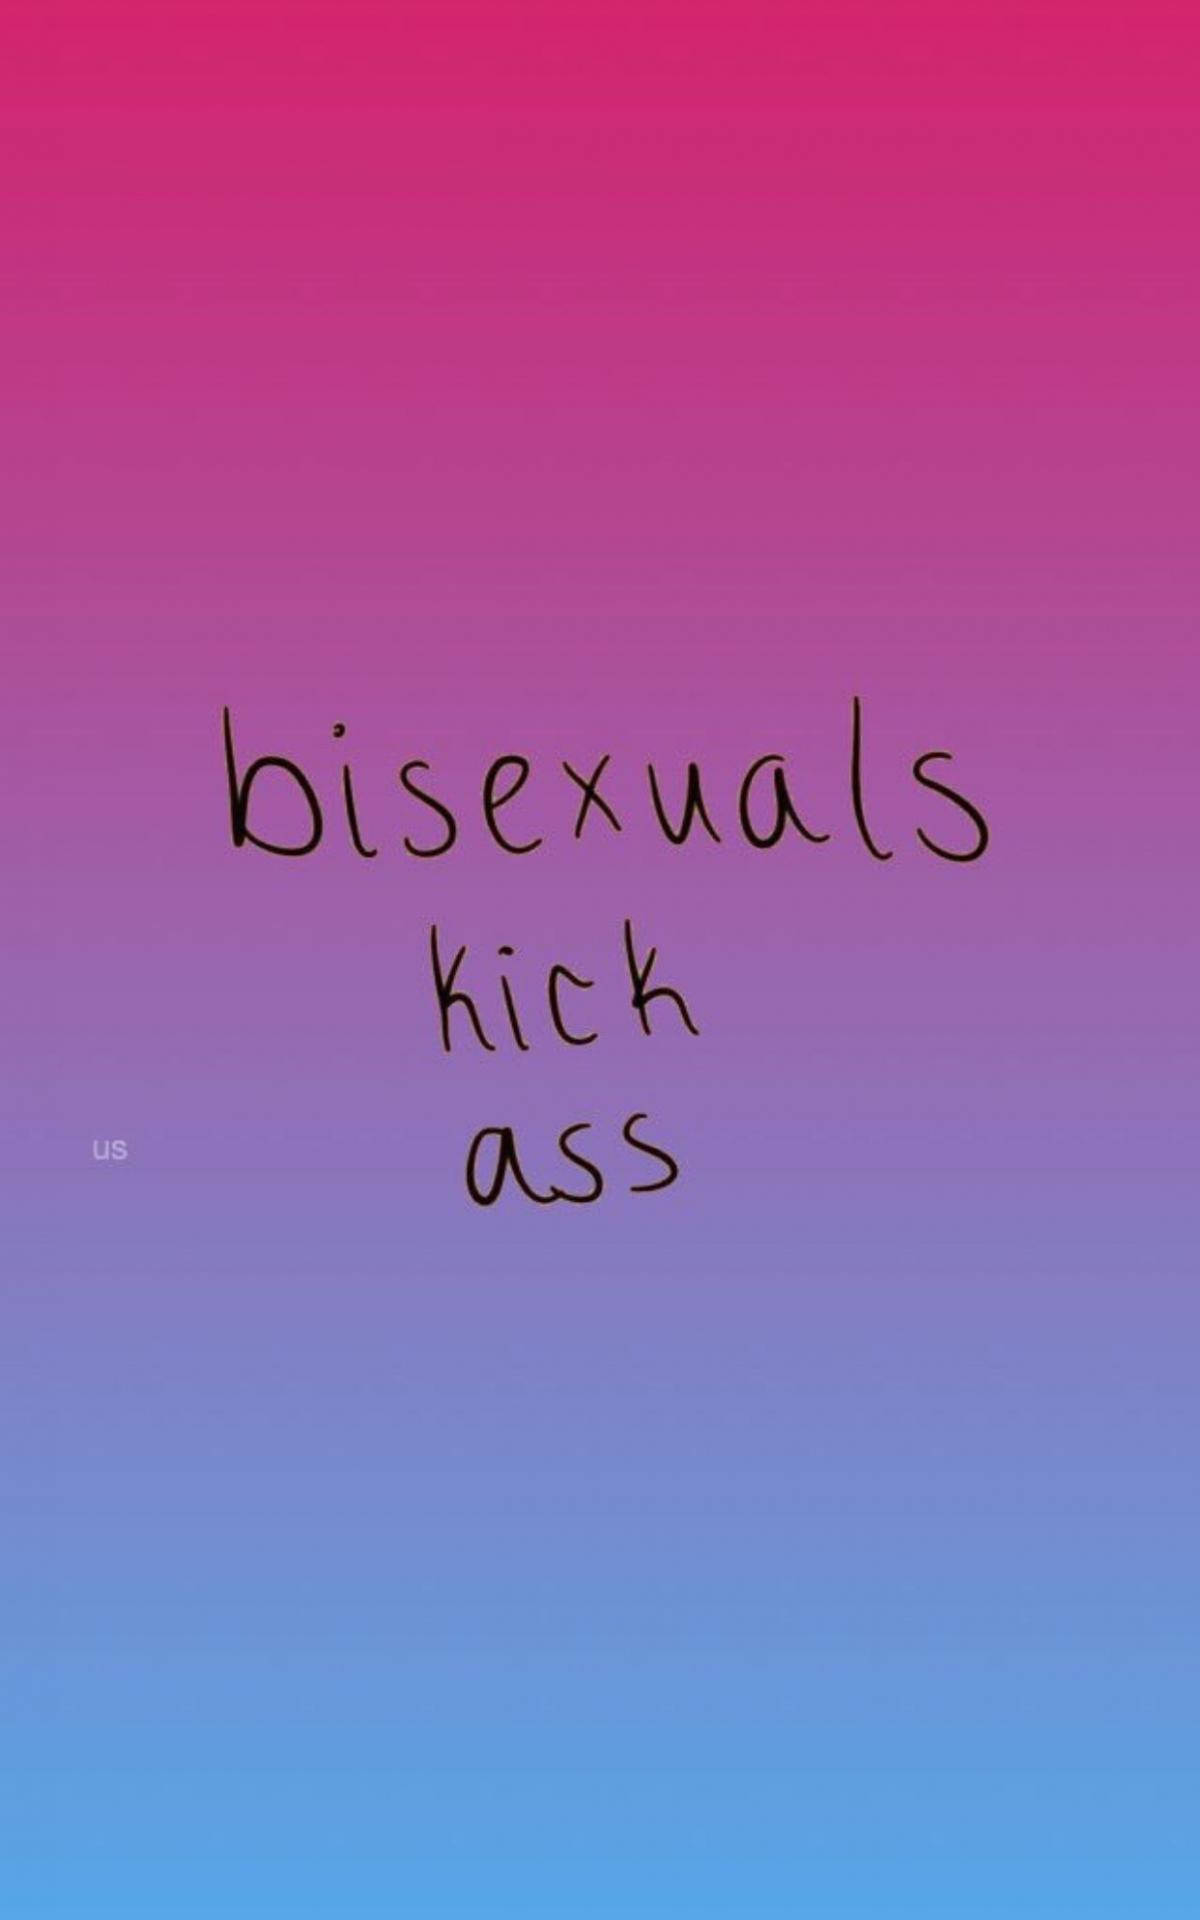 Bisexual Aesthetic Gradient Pink And Purple Background